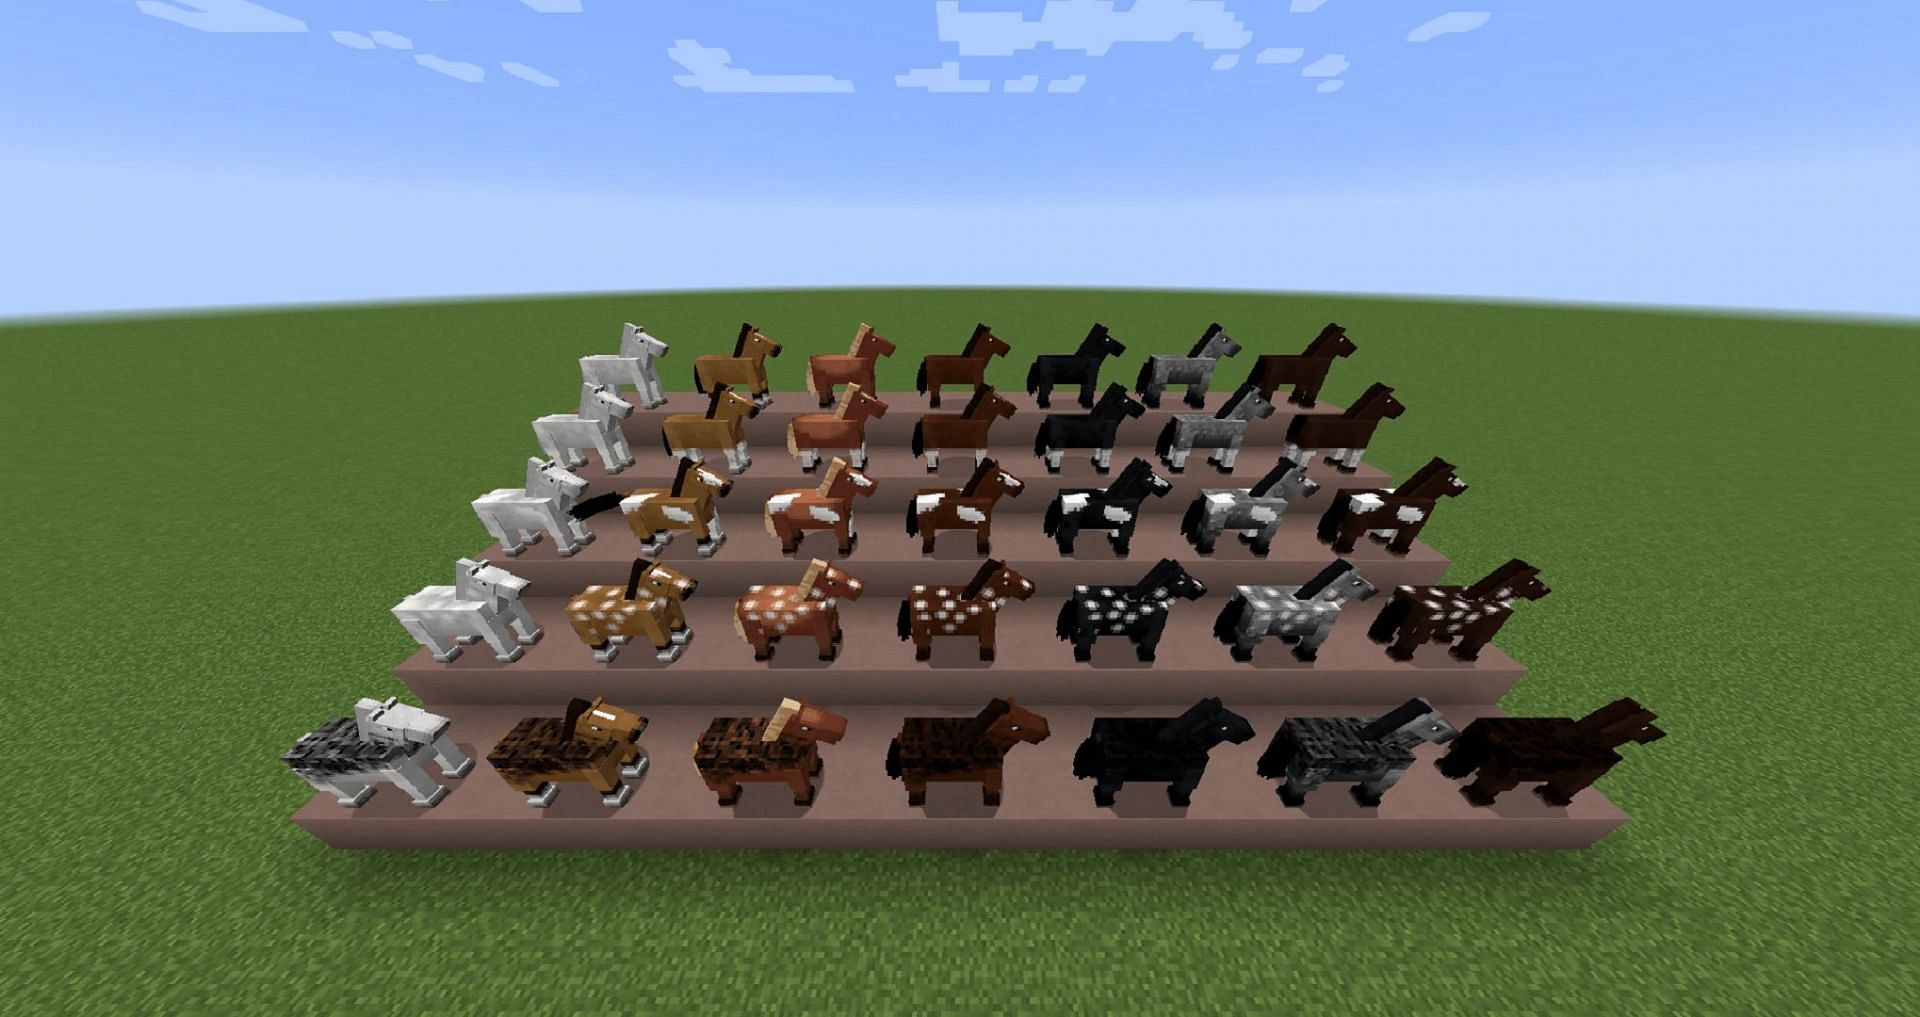 Various horse breeds on display in the game (Image via Minecraft Wiki)